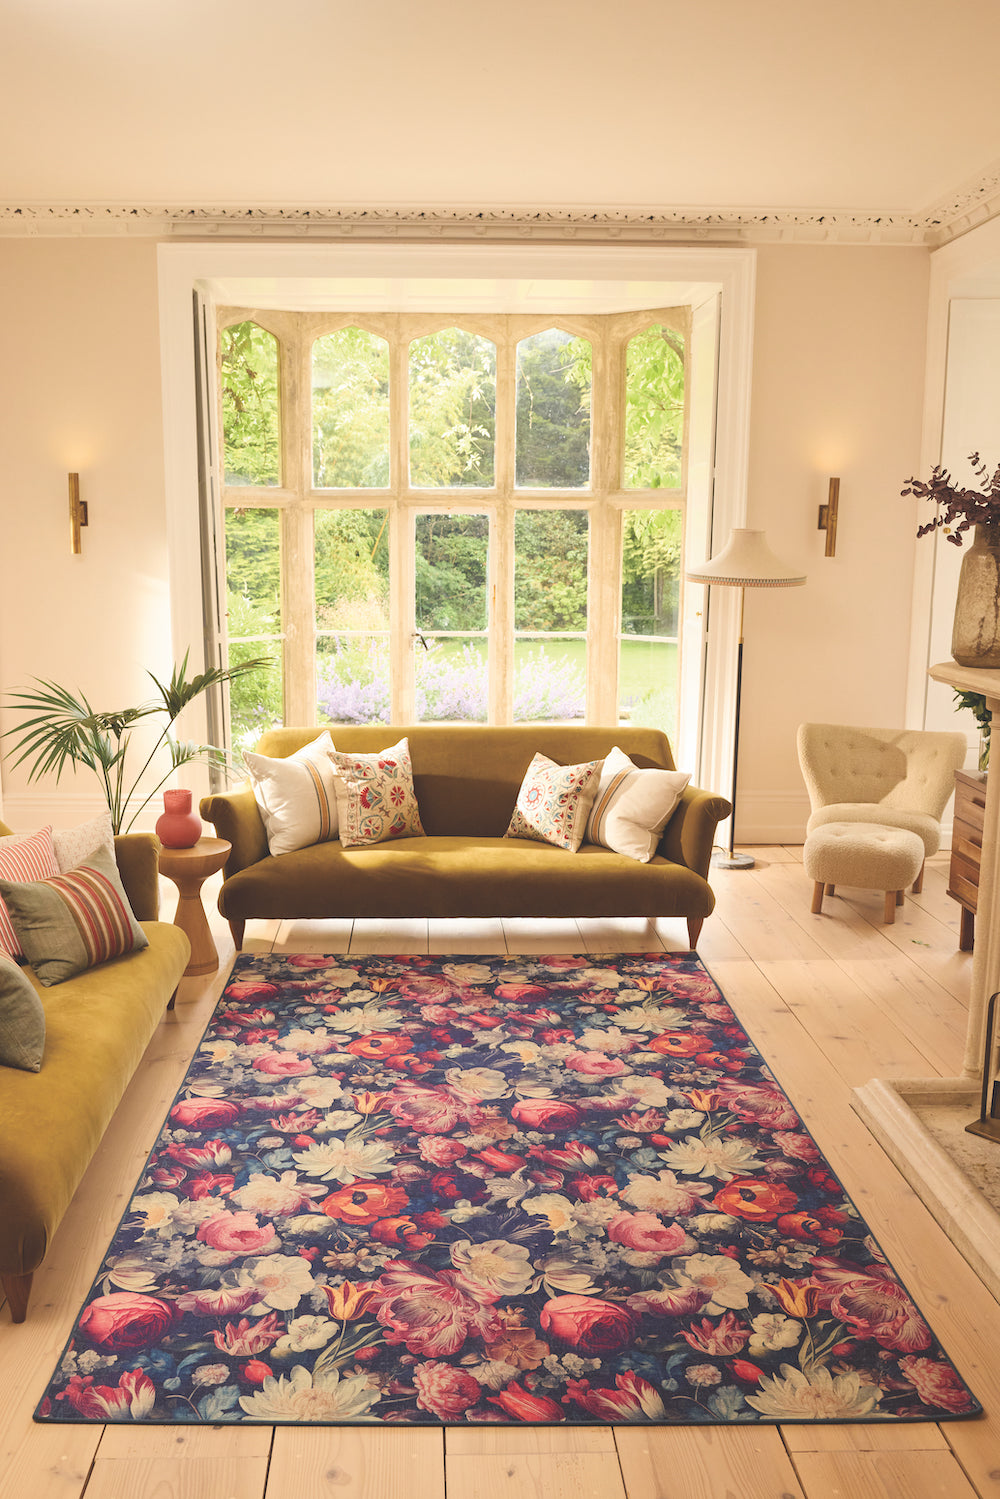 A Signature Collection flowered rug on a wooden floor in a sunny living room